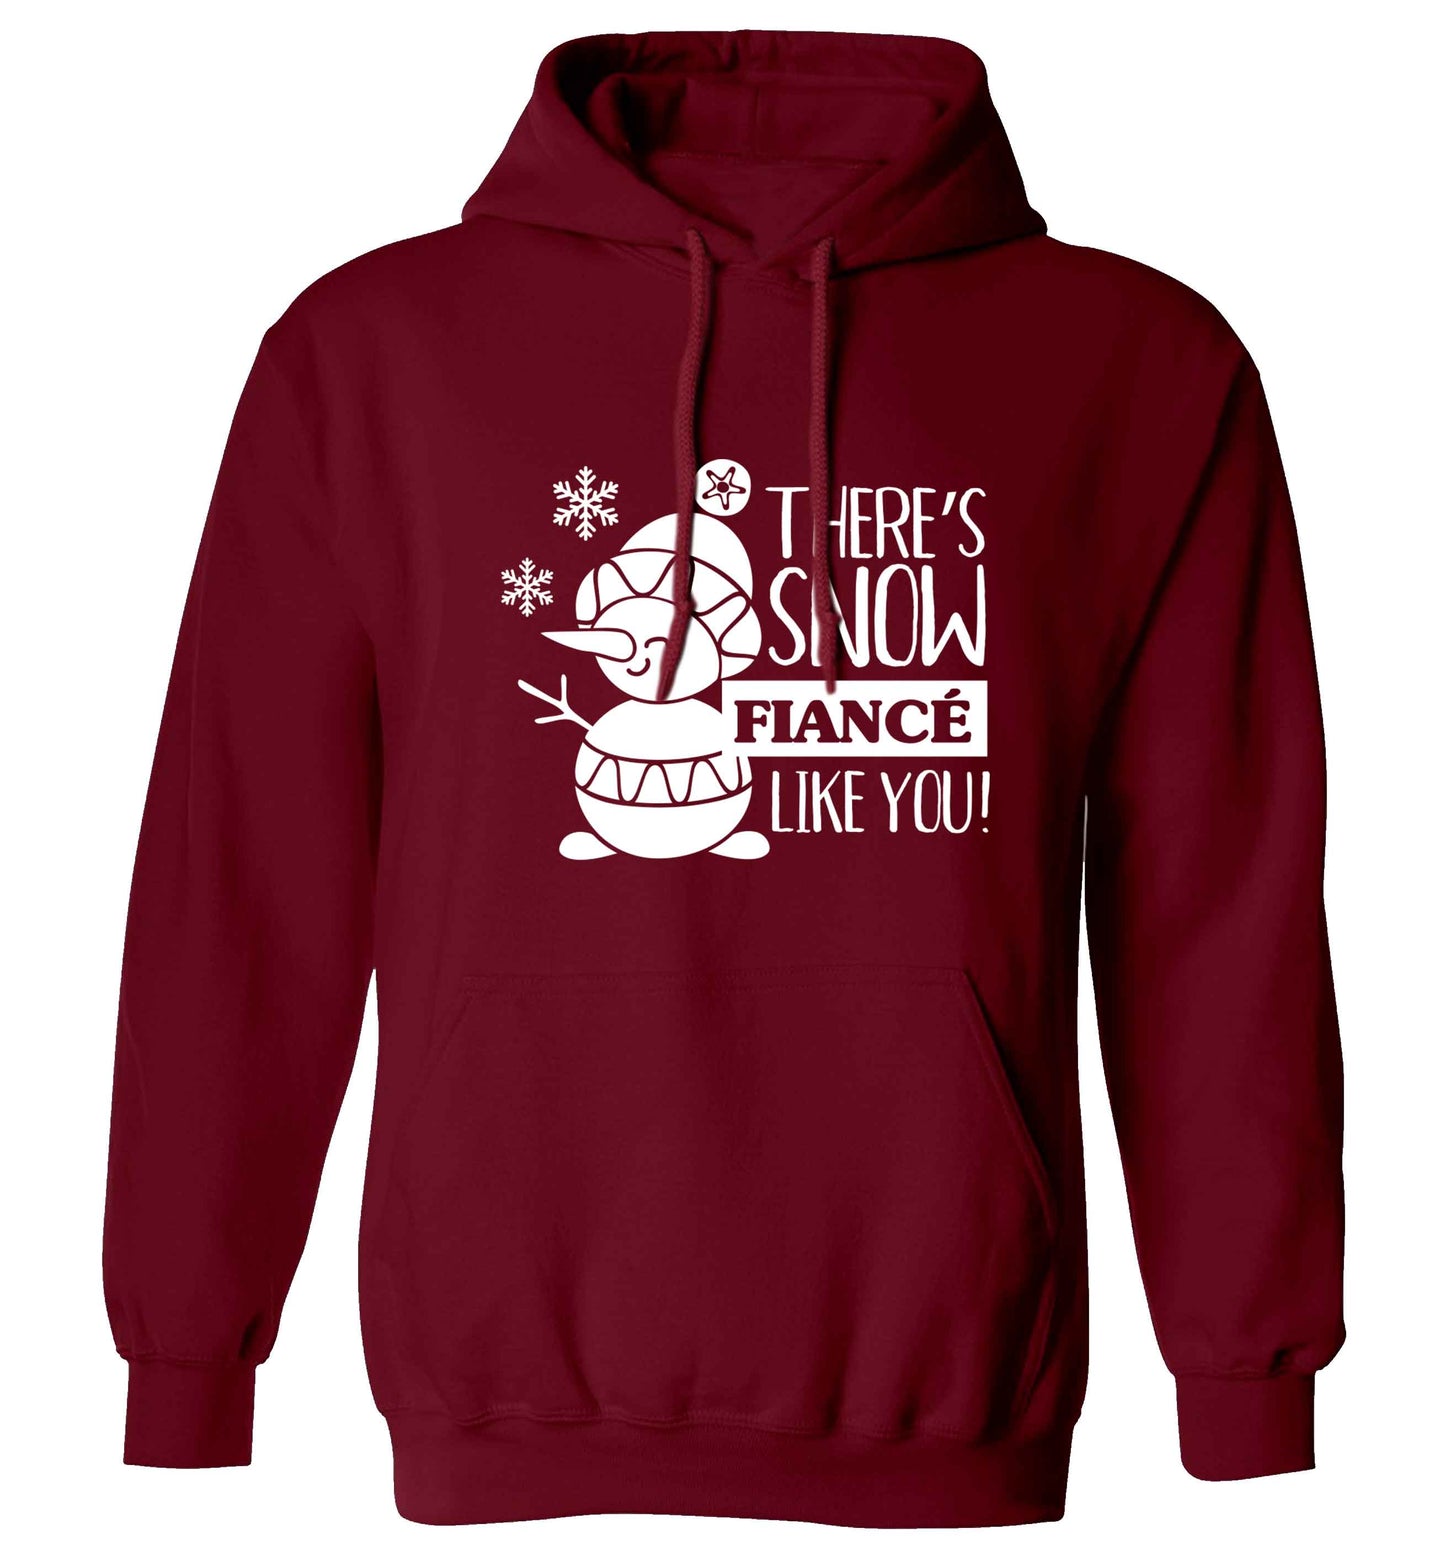 There's snow fiance like you adults unisex maroon hoodie 2XL